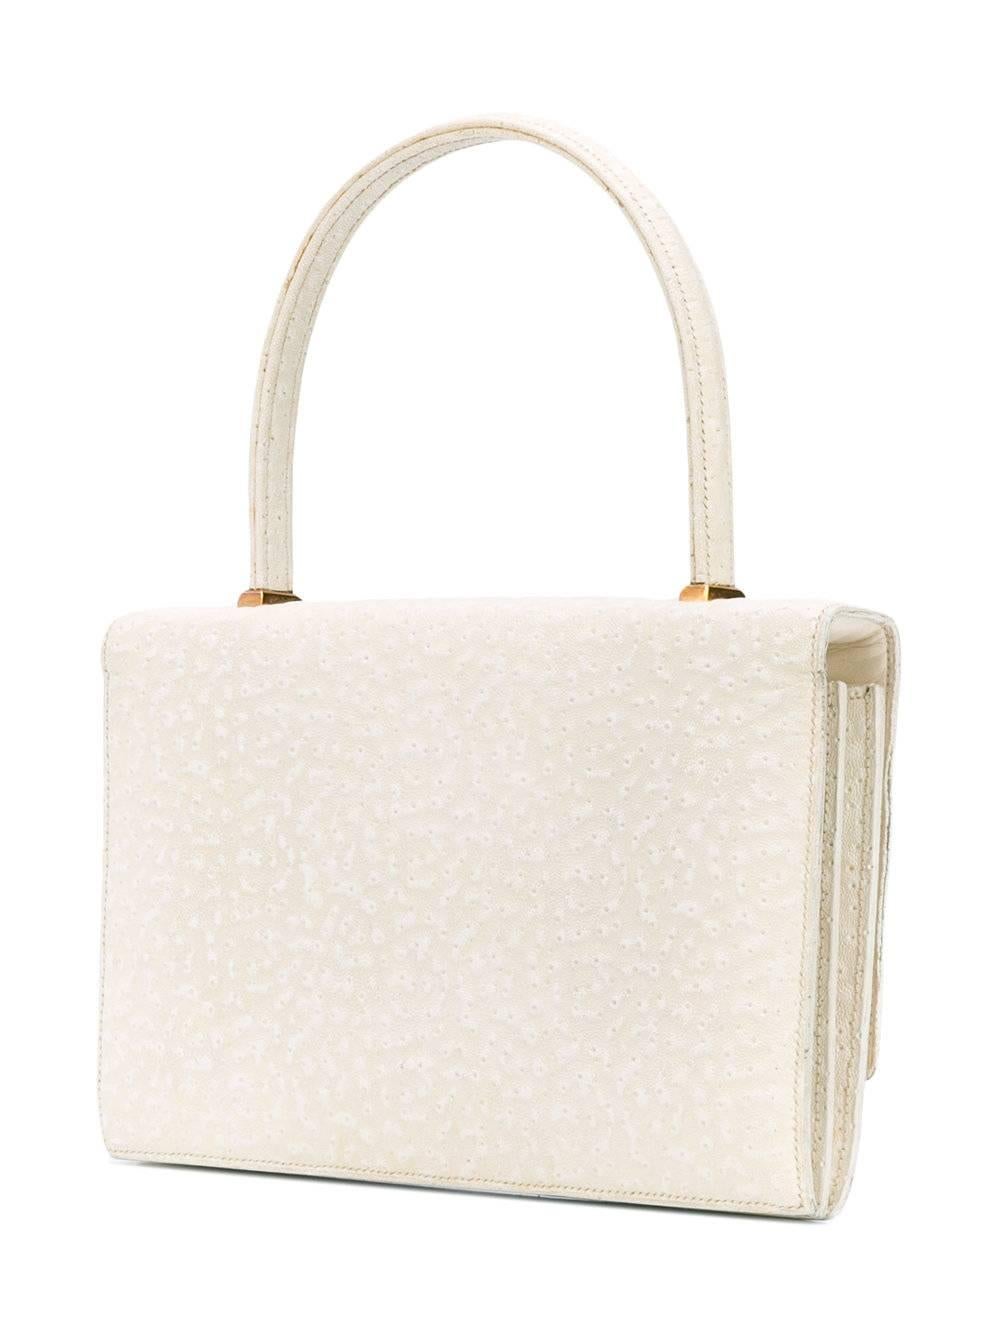 Elegant Hermès handbag crafted from white whale leather. It features a top handle, a foldover top, multiple interior compartments and gold-tone hardware. The item is vintage, it was produced in the 60s and is in good conditions, it shows light signs